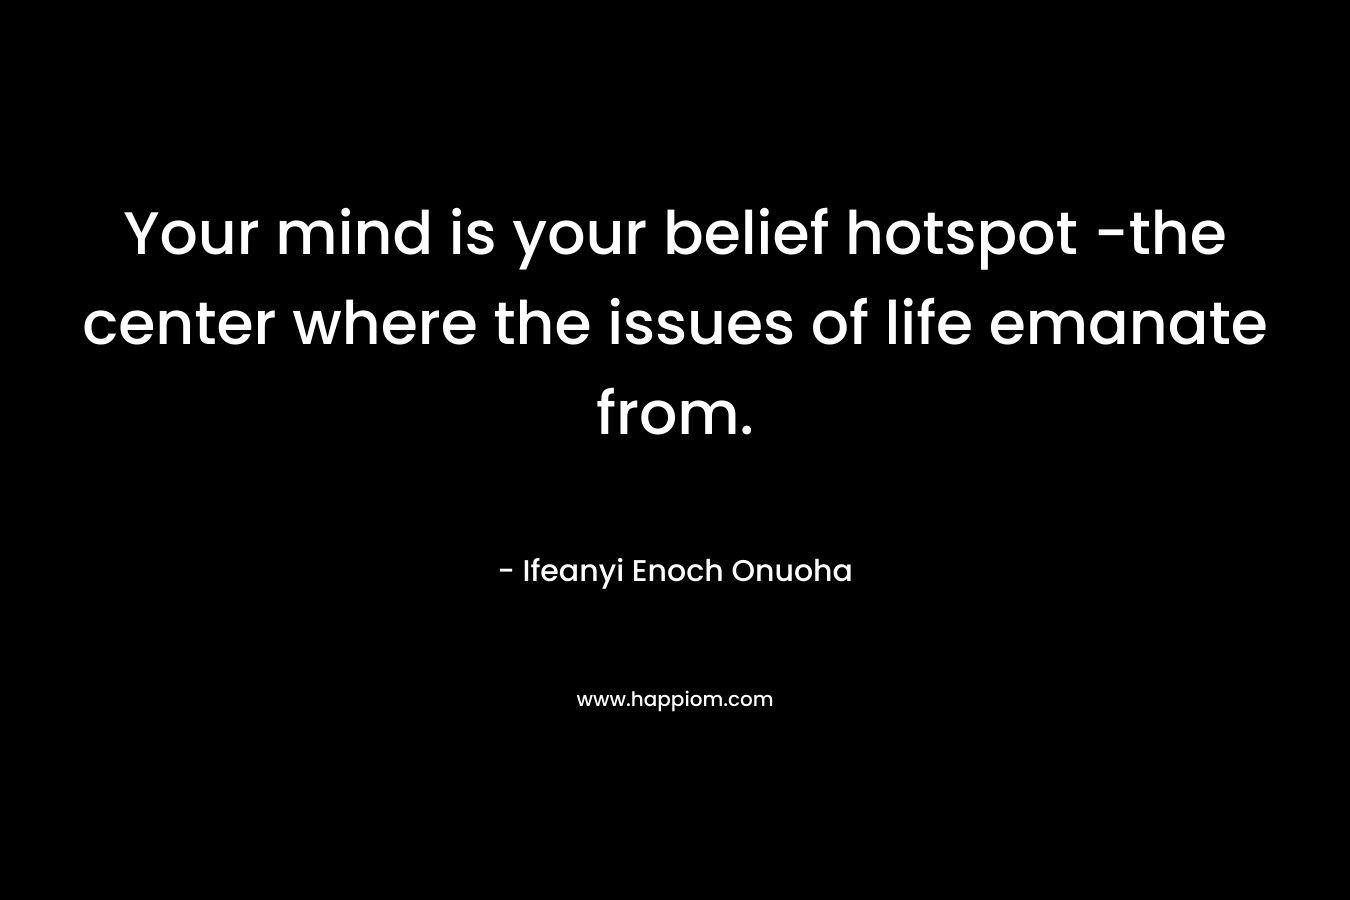 Your mind is your belief hotspot -the center where the issues of life emanate from.